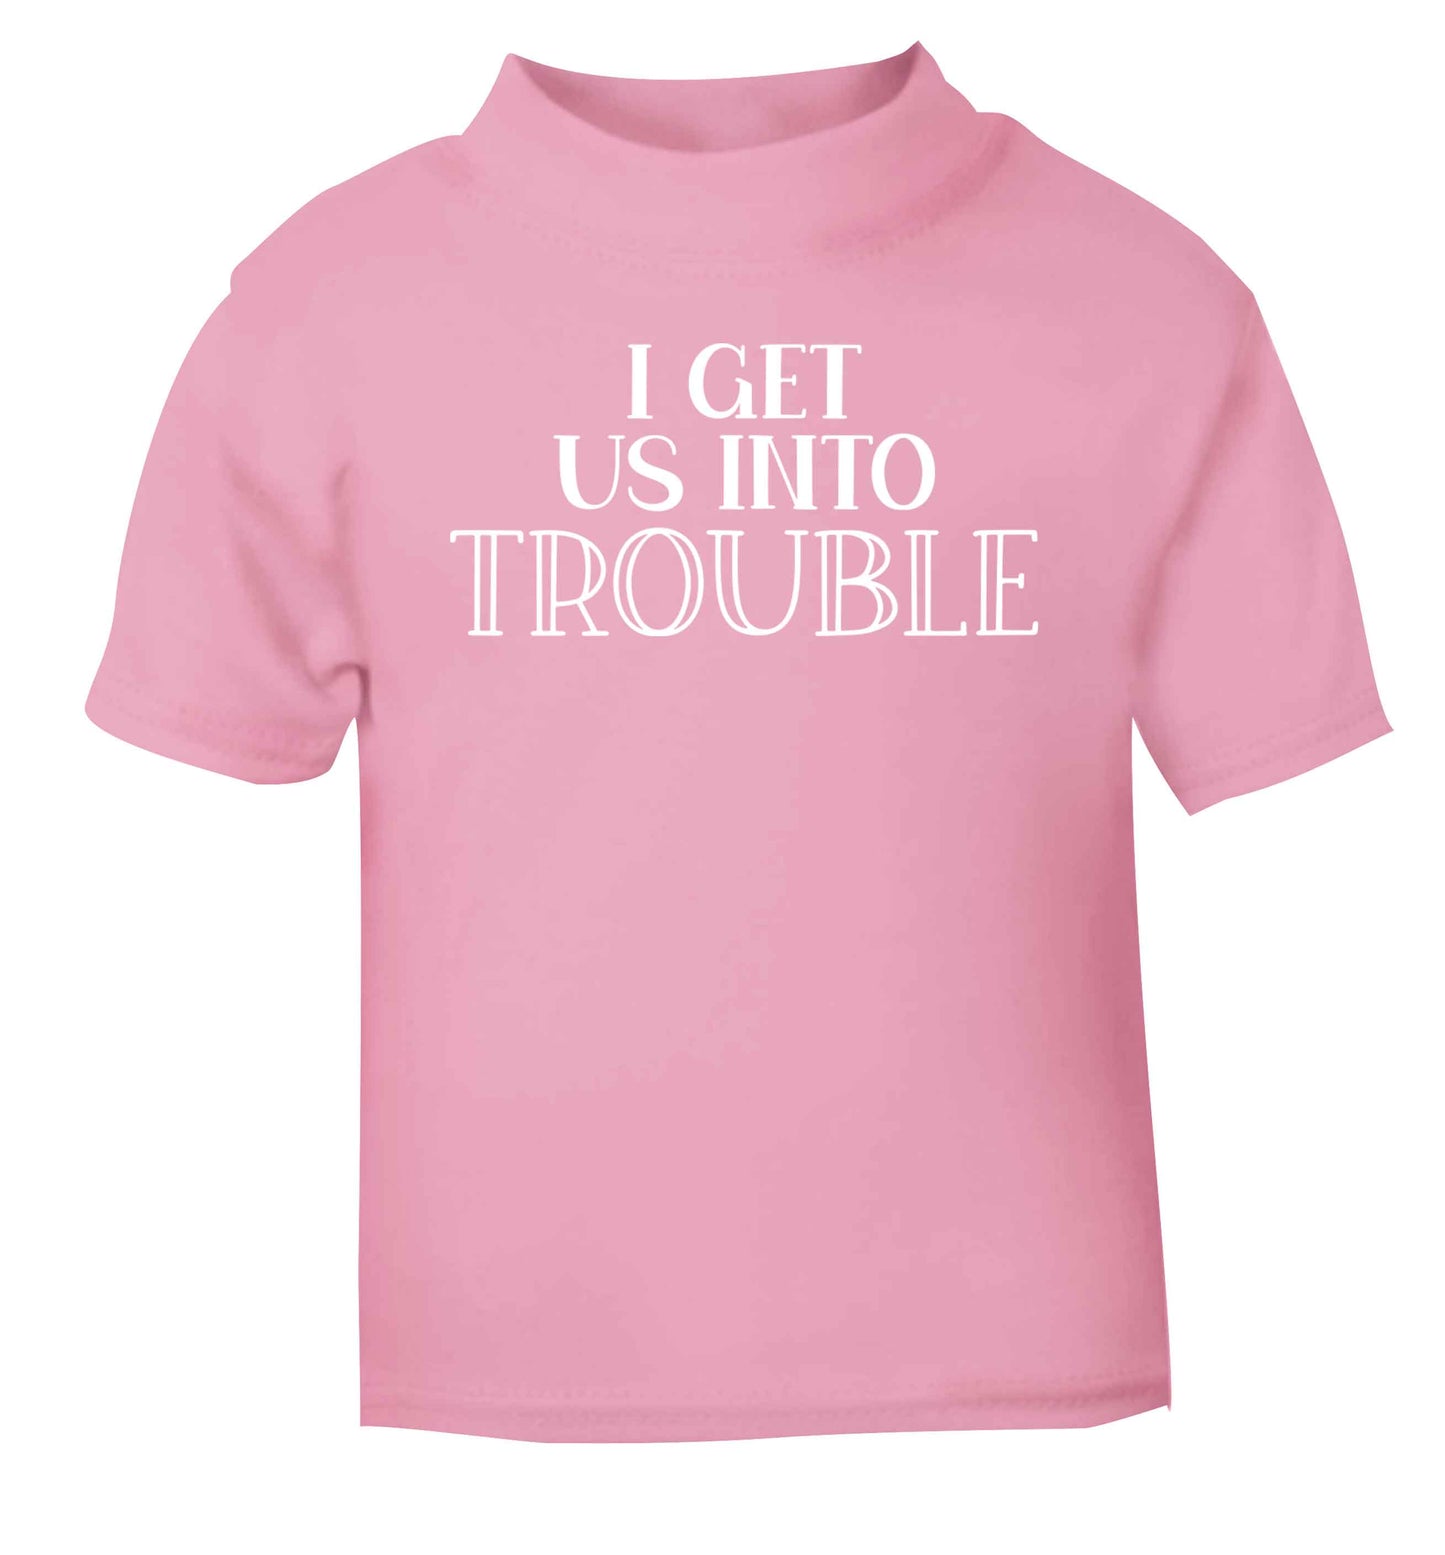 I get us into trouble light pink baby toddler Tshirt 2 Years